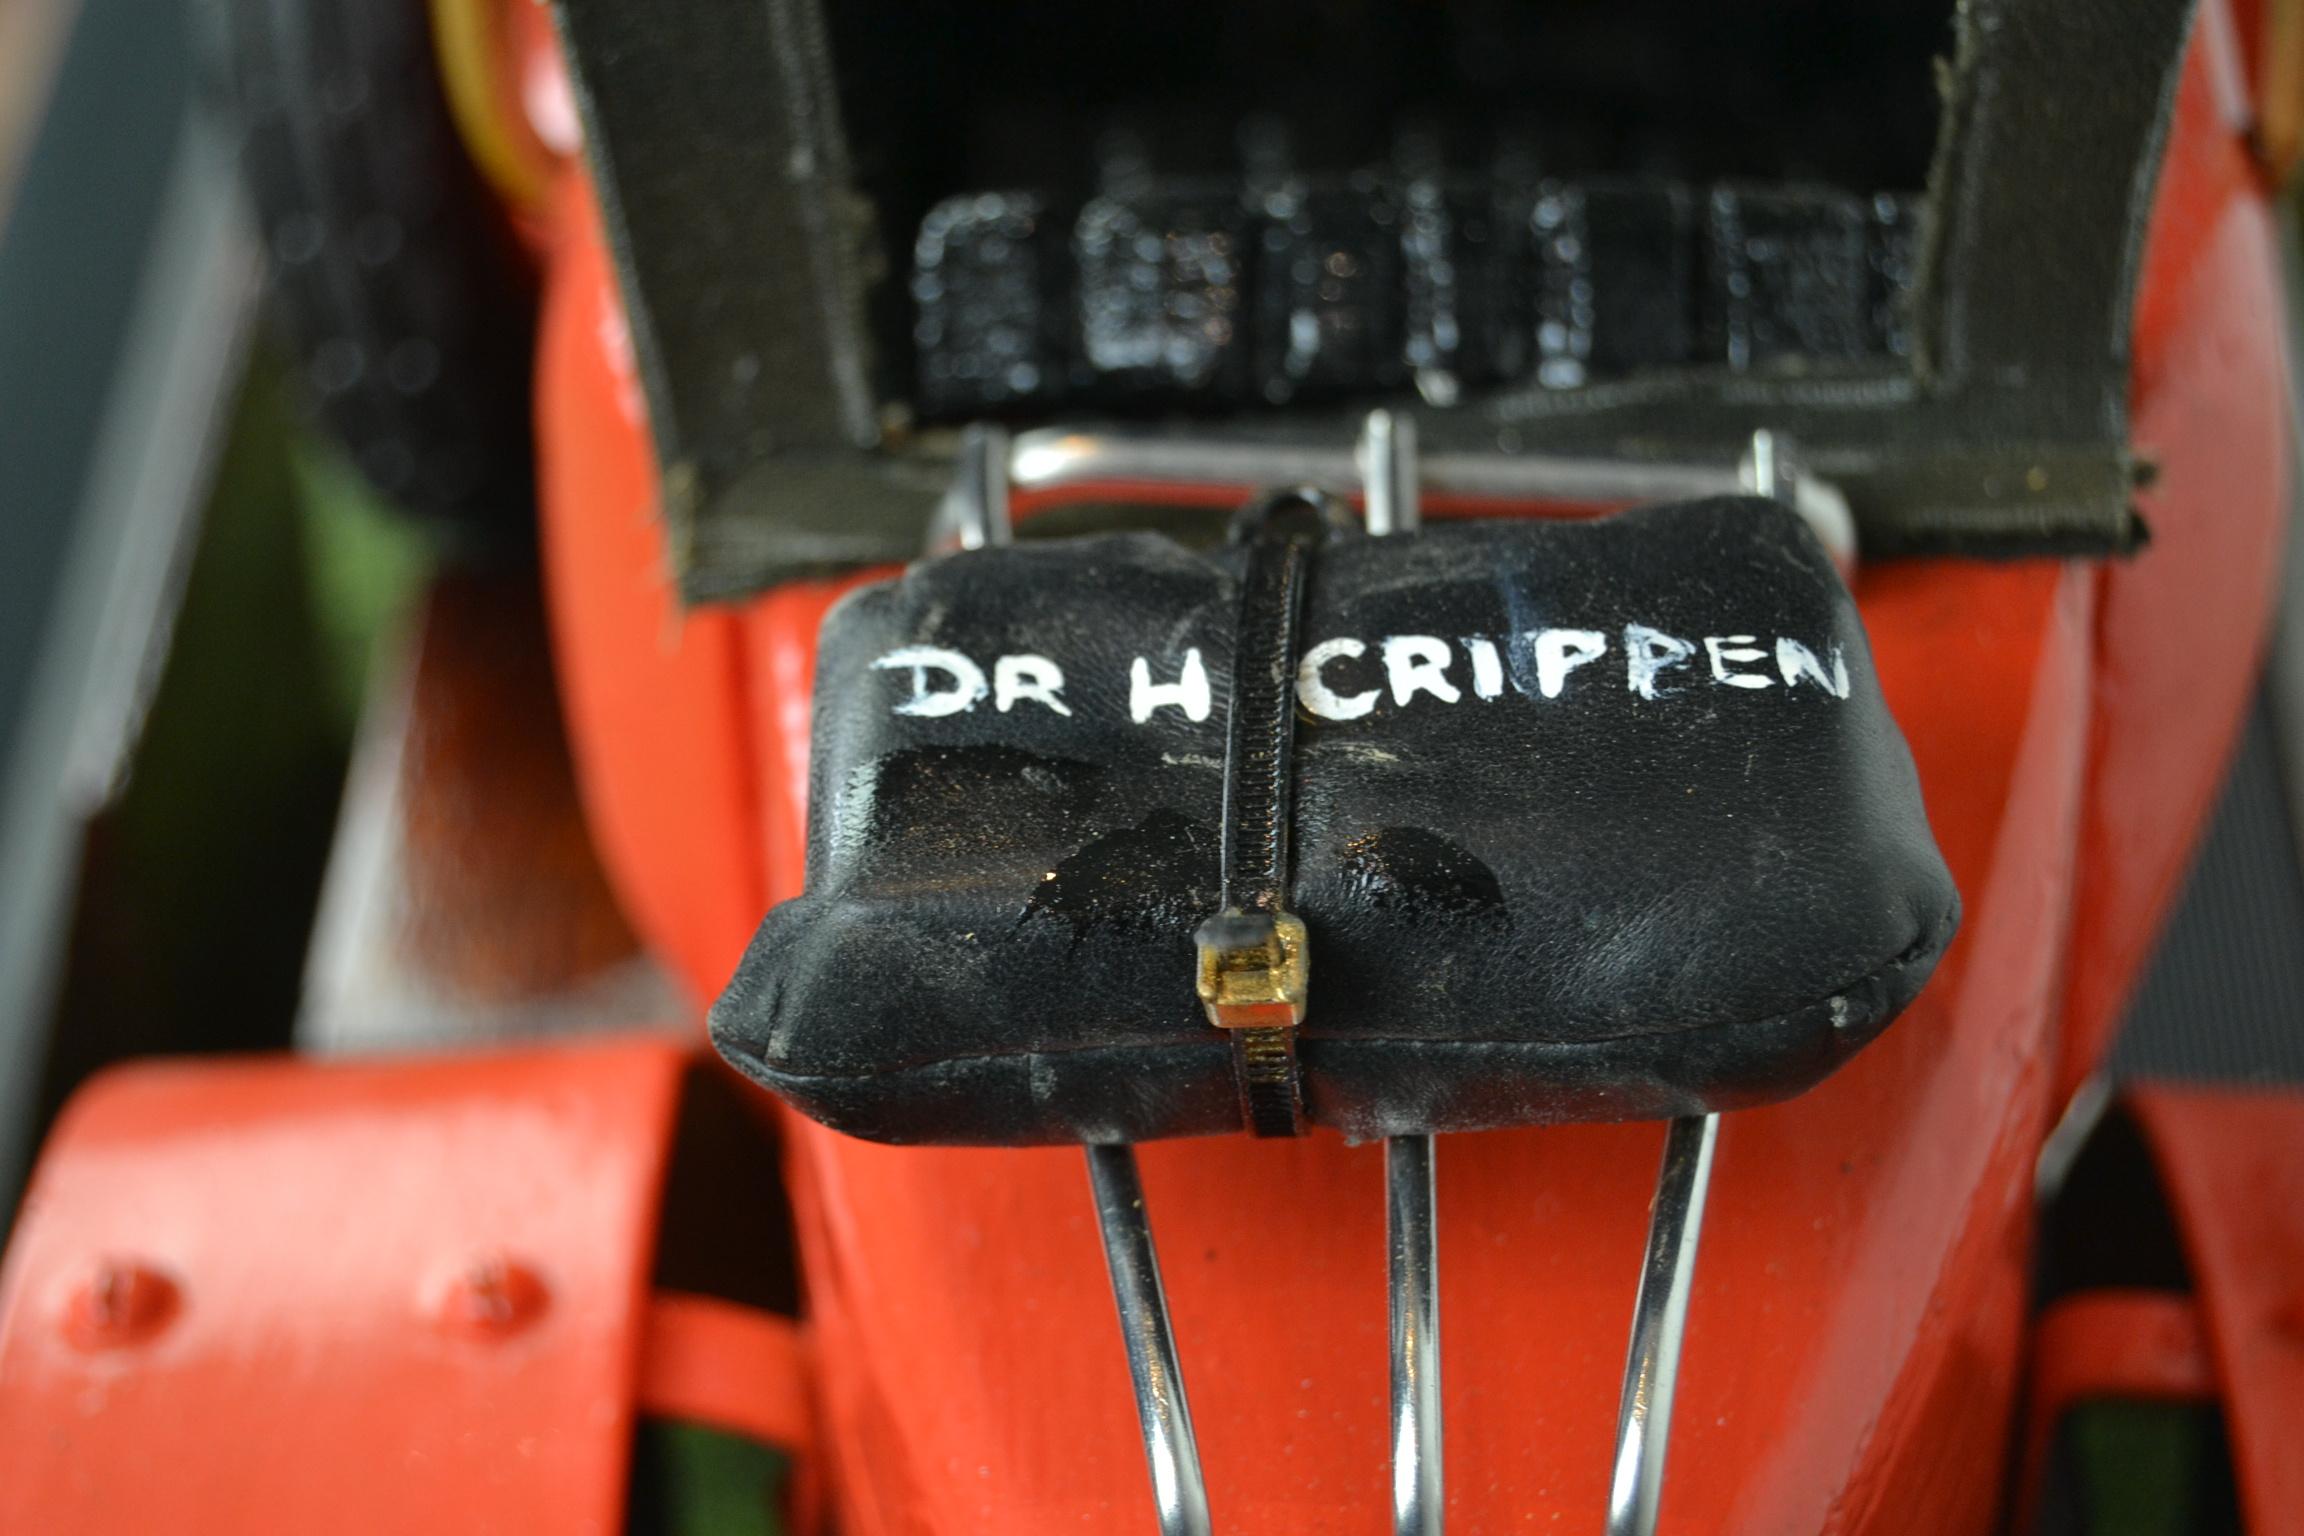 Metal Large Hillman 8.9 Hp 1913 Model Car of Dr. H. Crippen, Handcrafted, 1960s